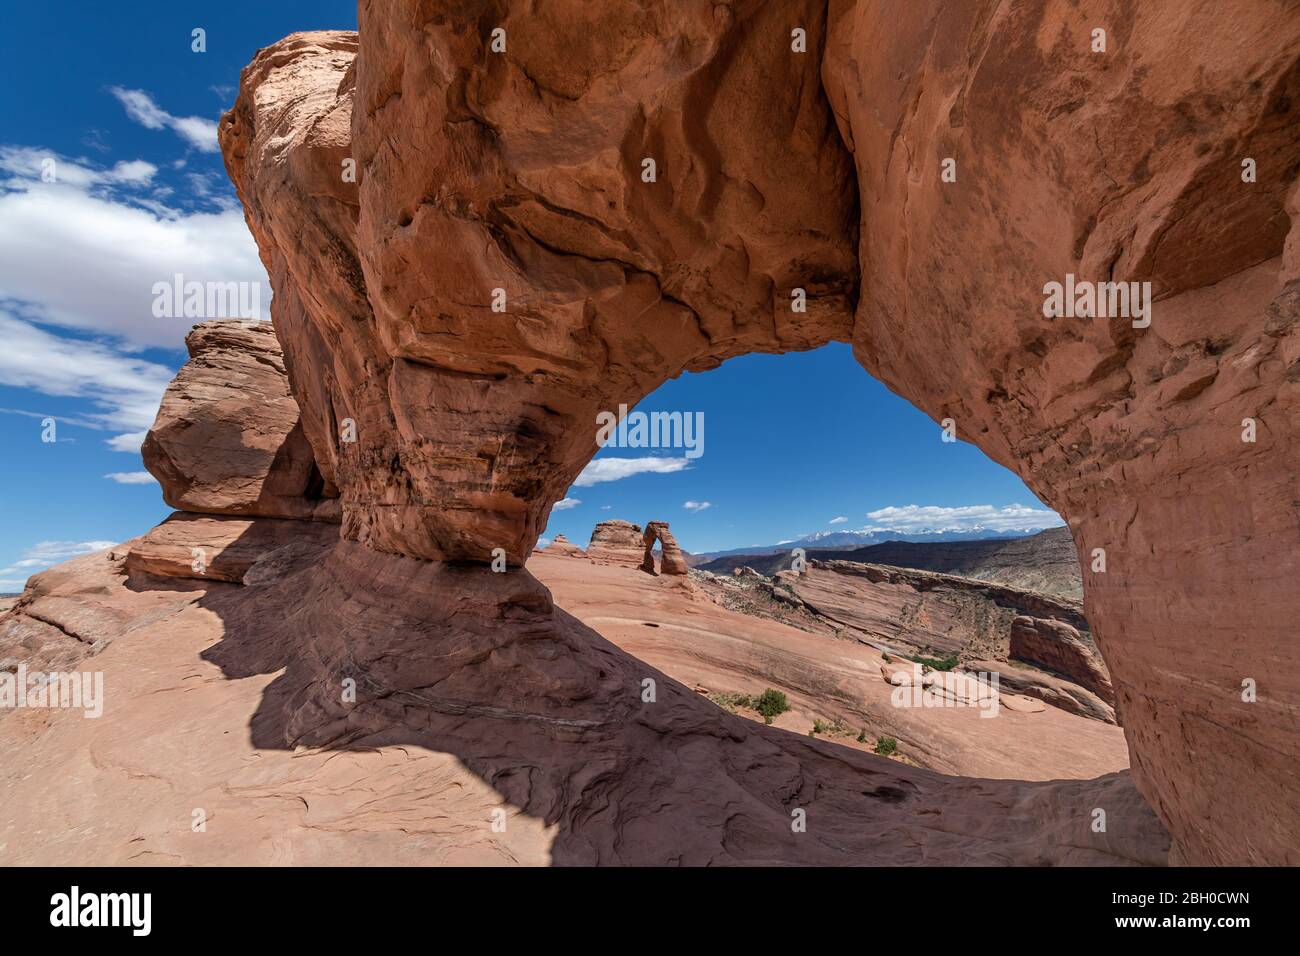 The stone arch known ad Delicate Arch as seen through a nearby arch, against a blue sky with puffy clouds Stock Photo